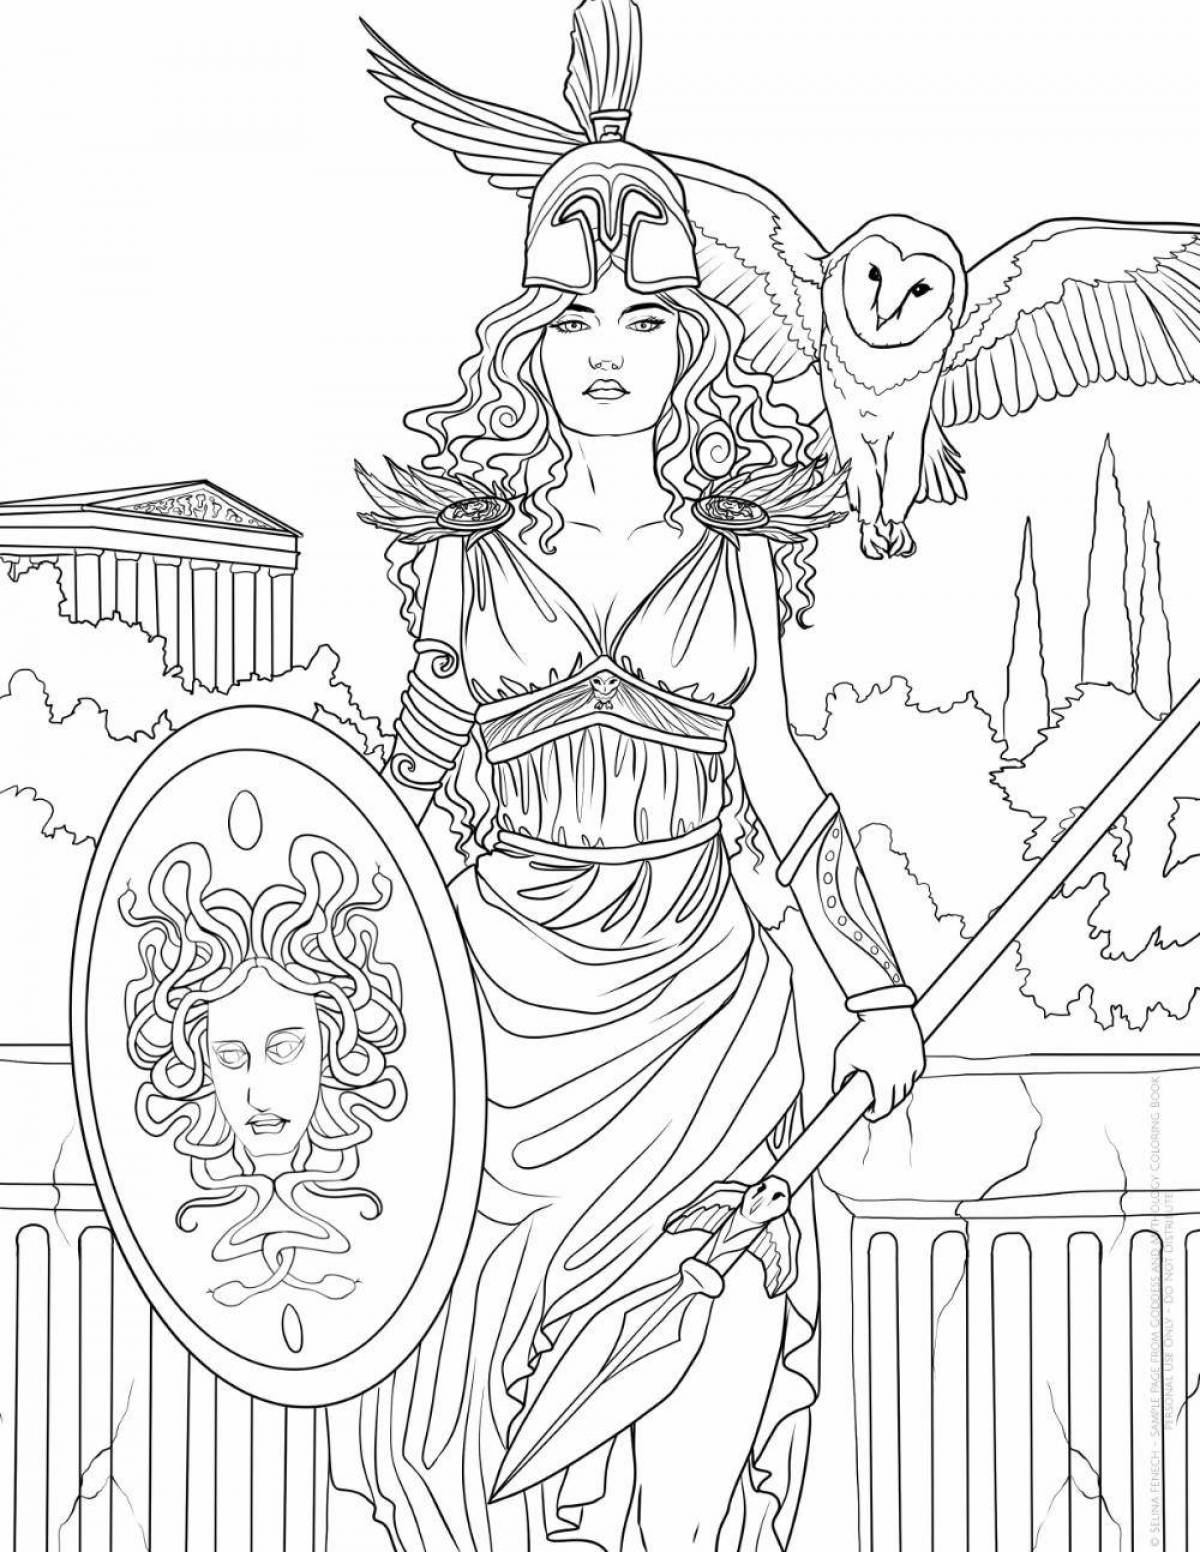 Exquisite myth coloring book